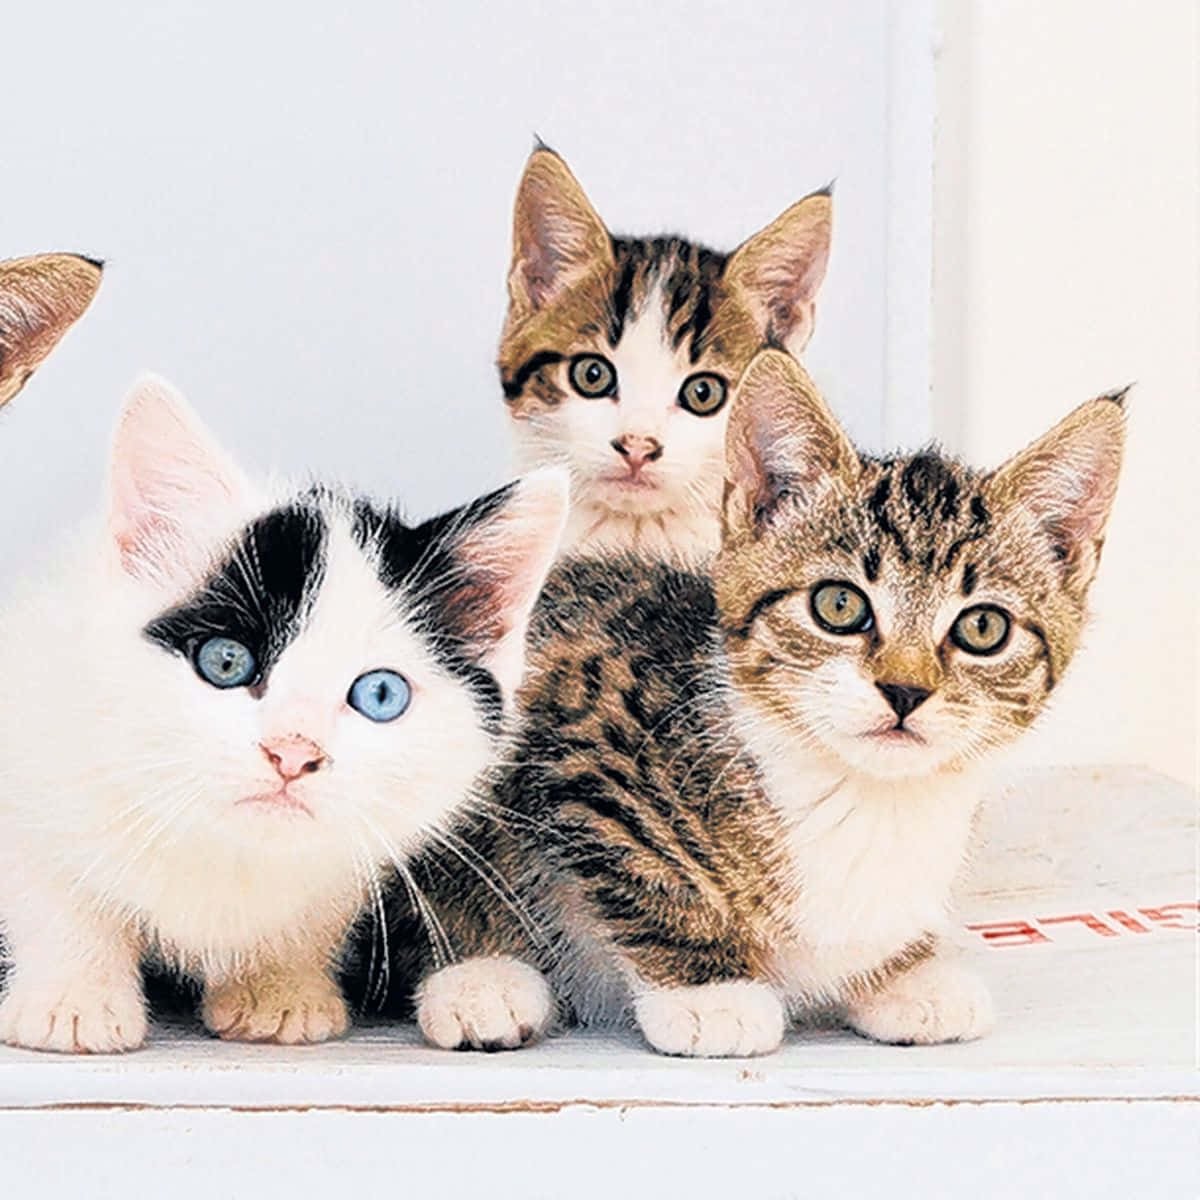 Three Cute Kittens Staring Picture